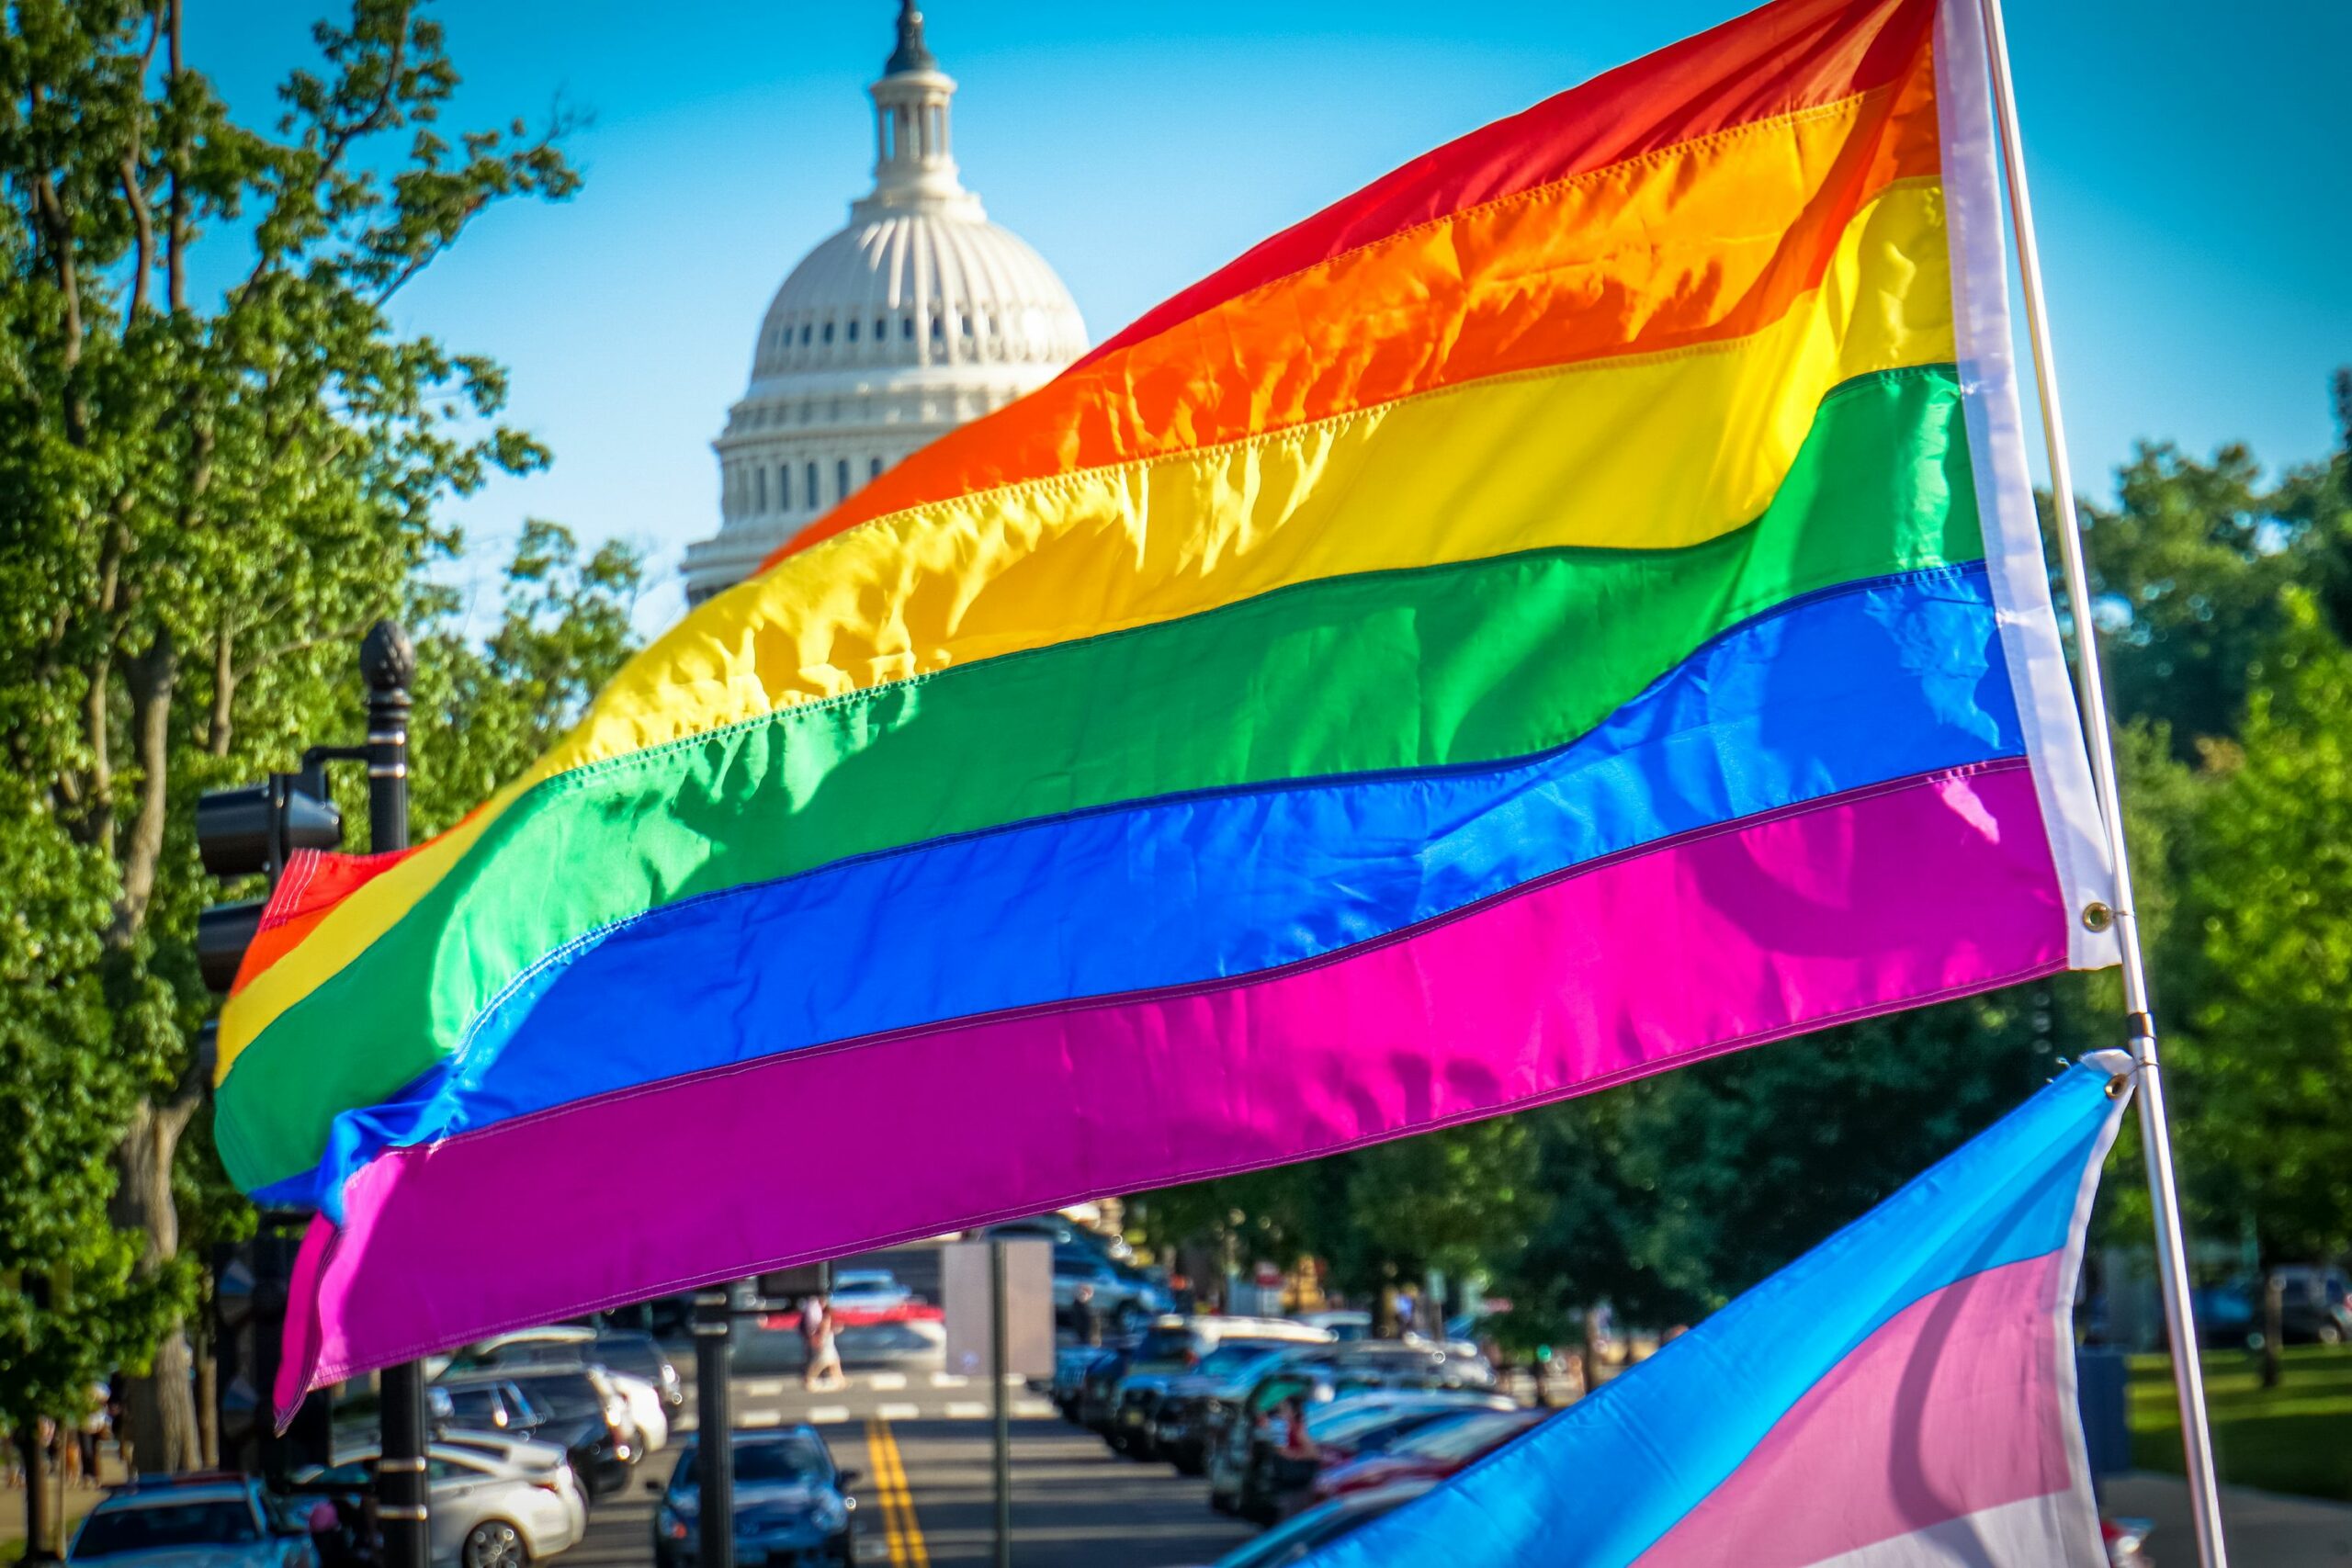 Opinion | The Republican Case for Federal LGBT Rights